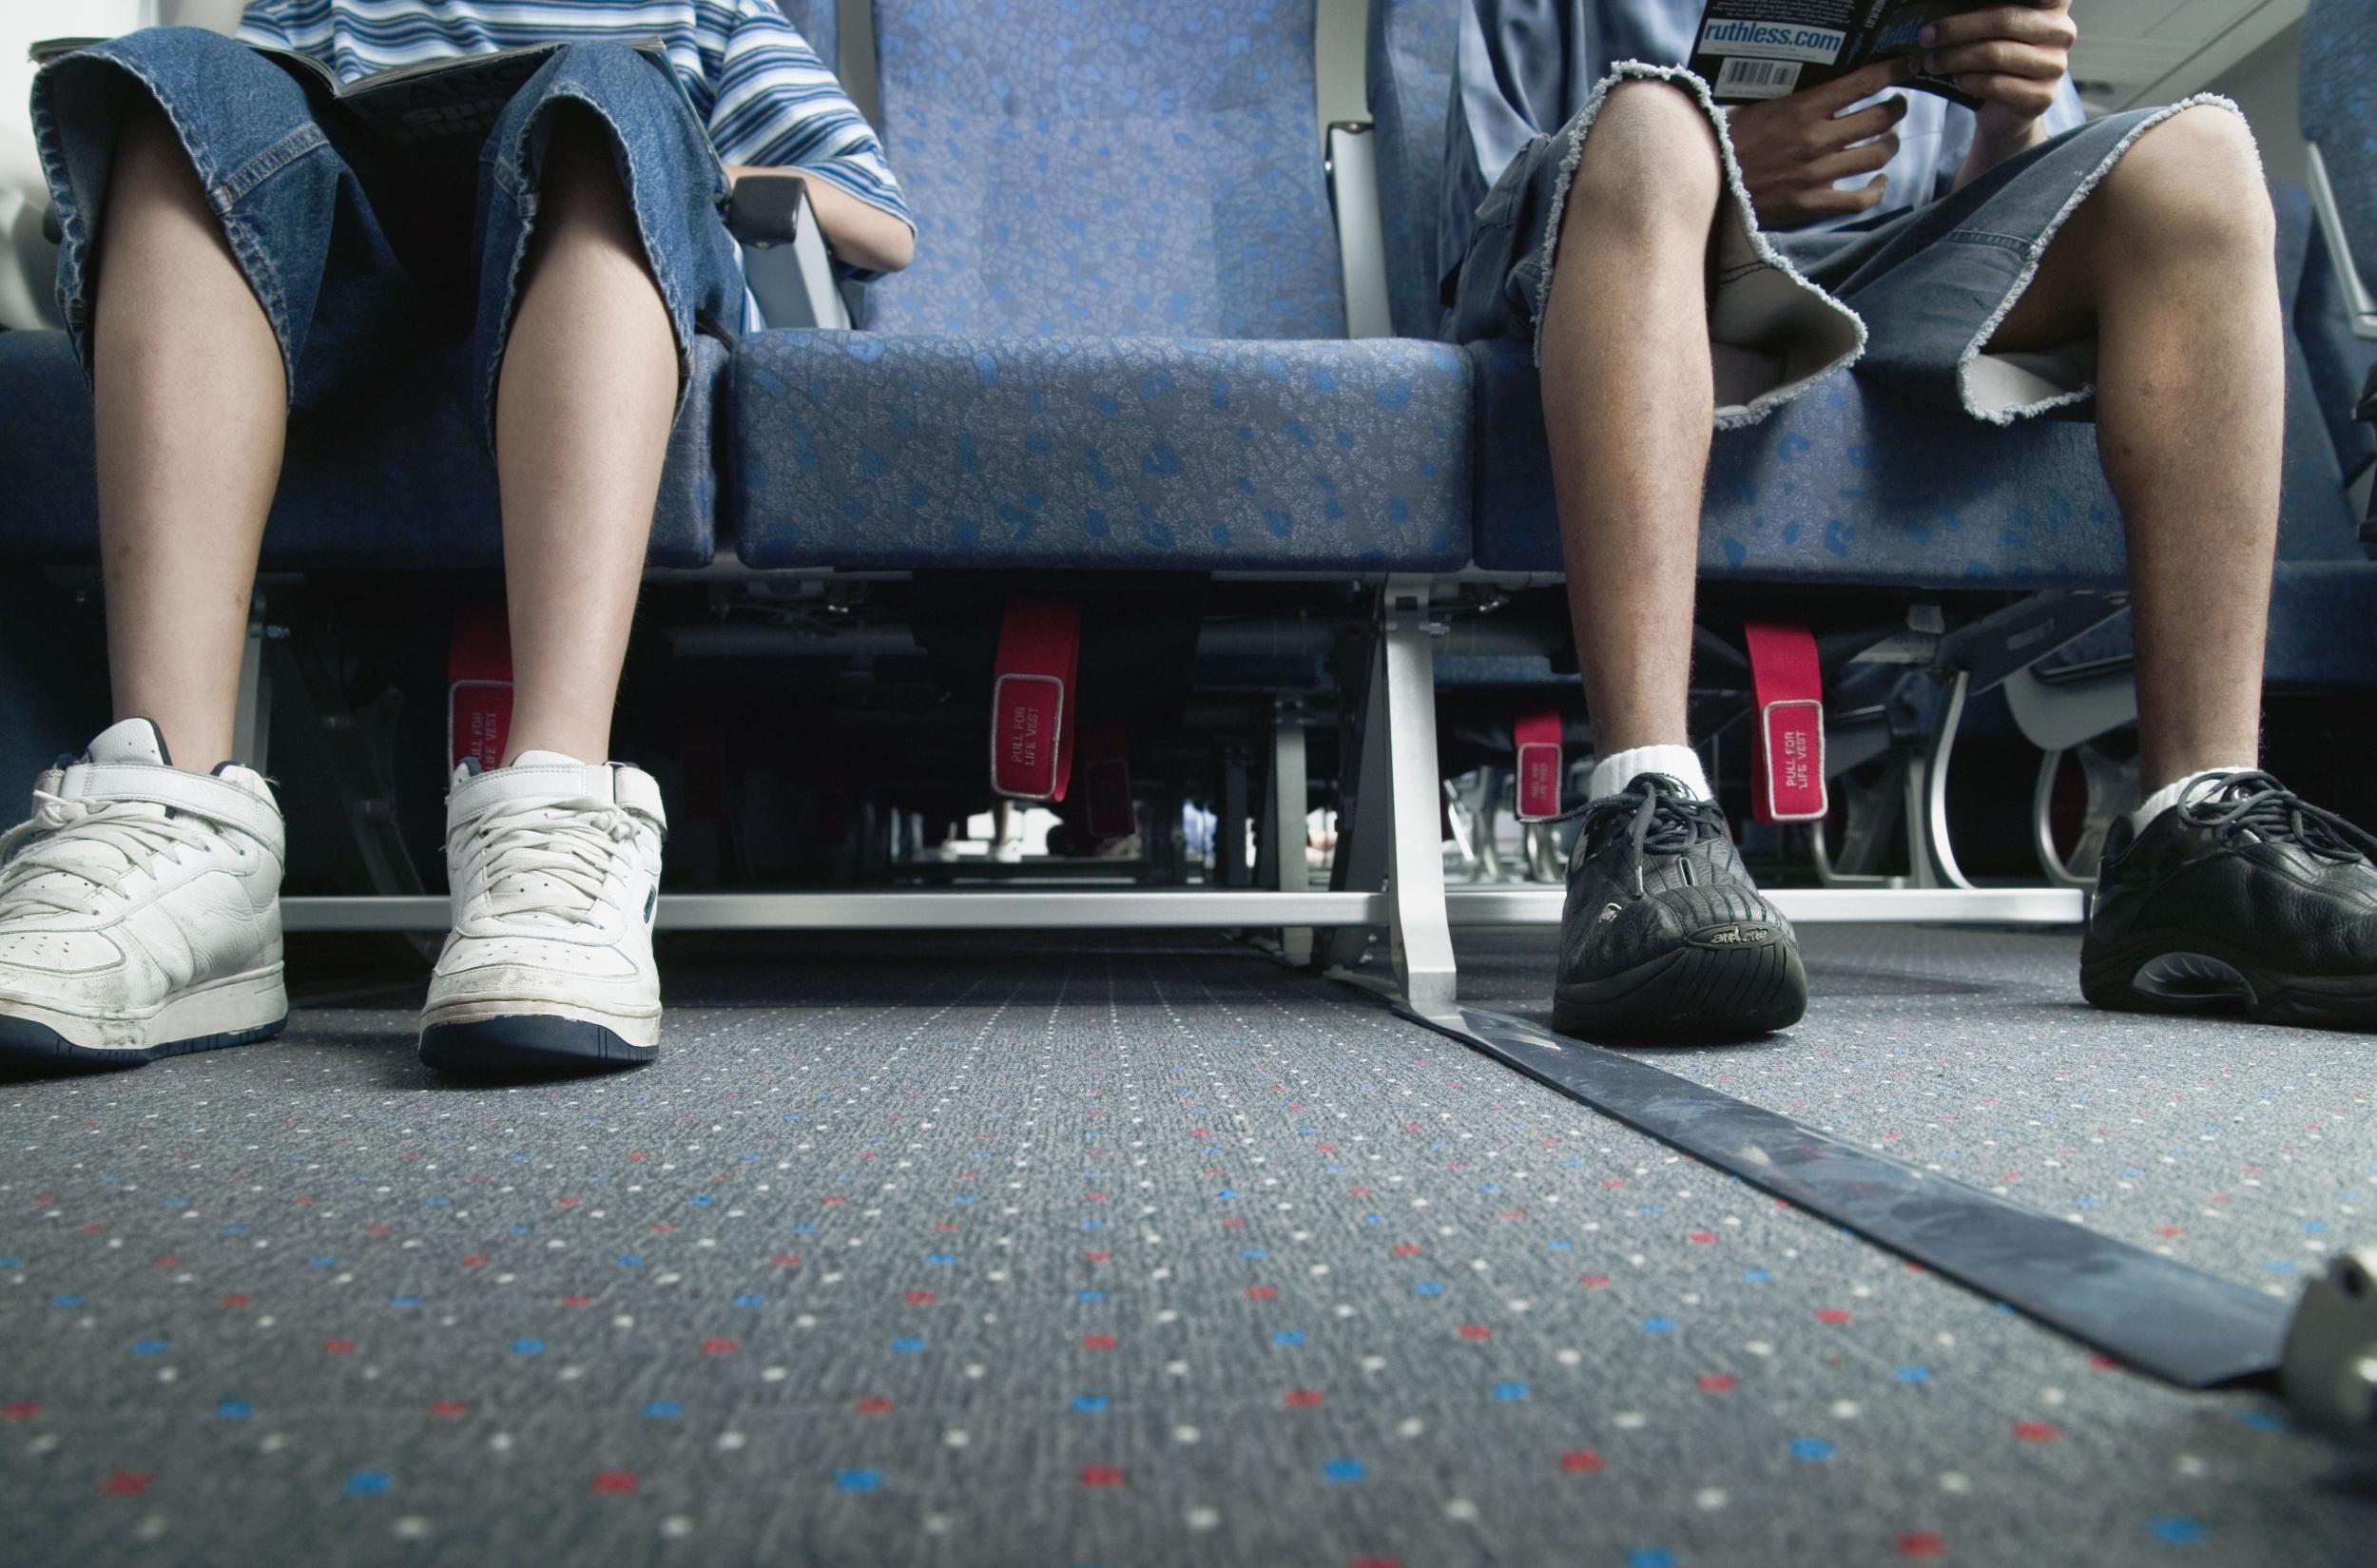 Summer travellers - whether they're school groups or families - are the worst, says Brad